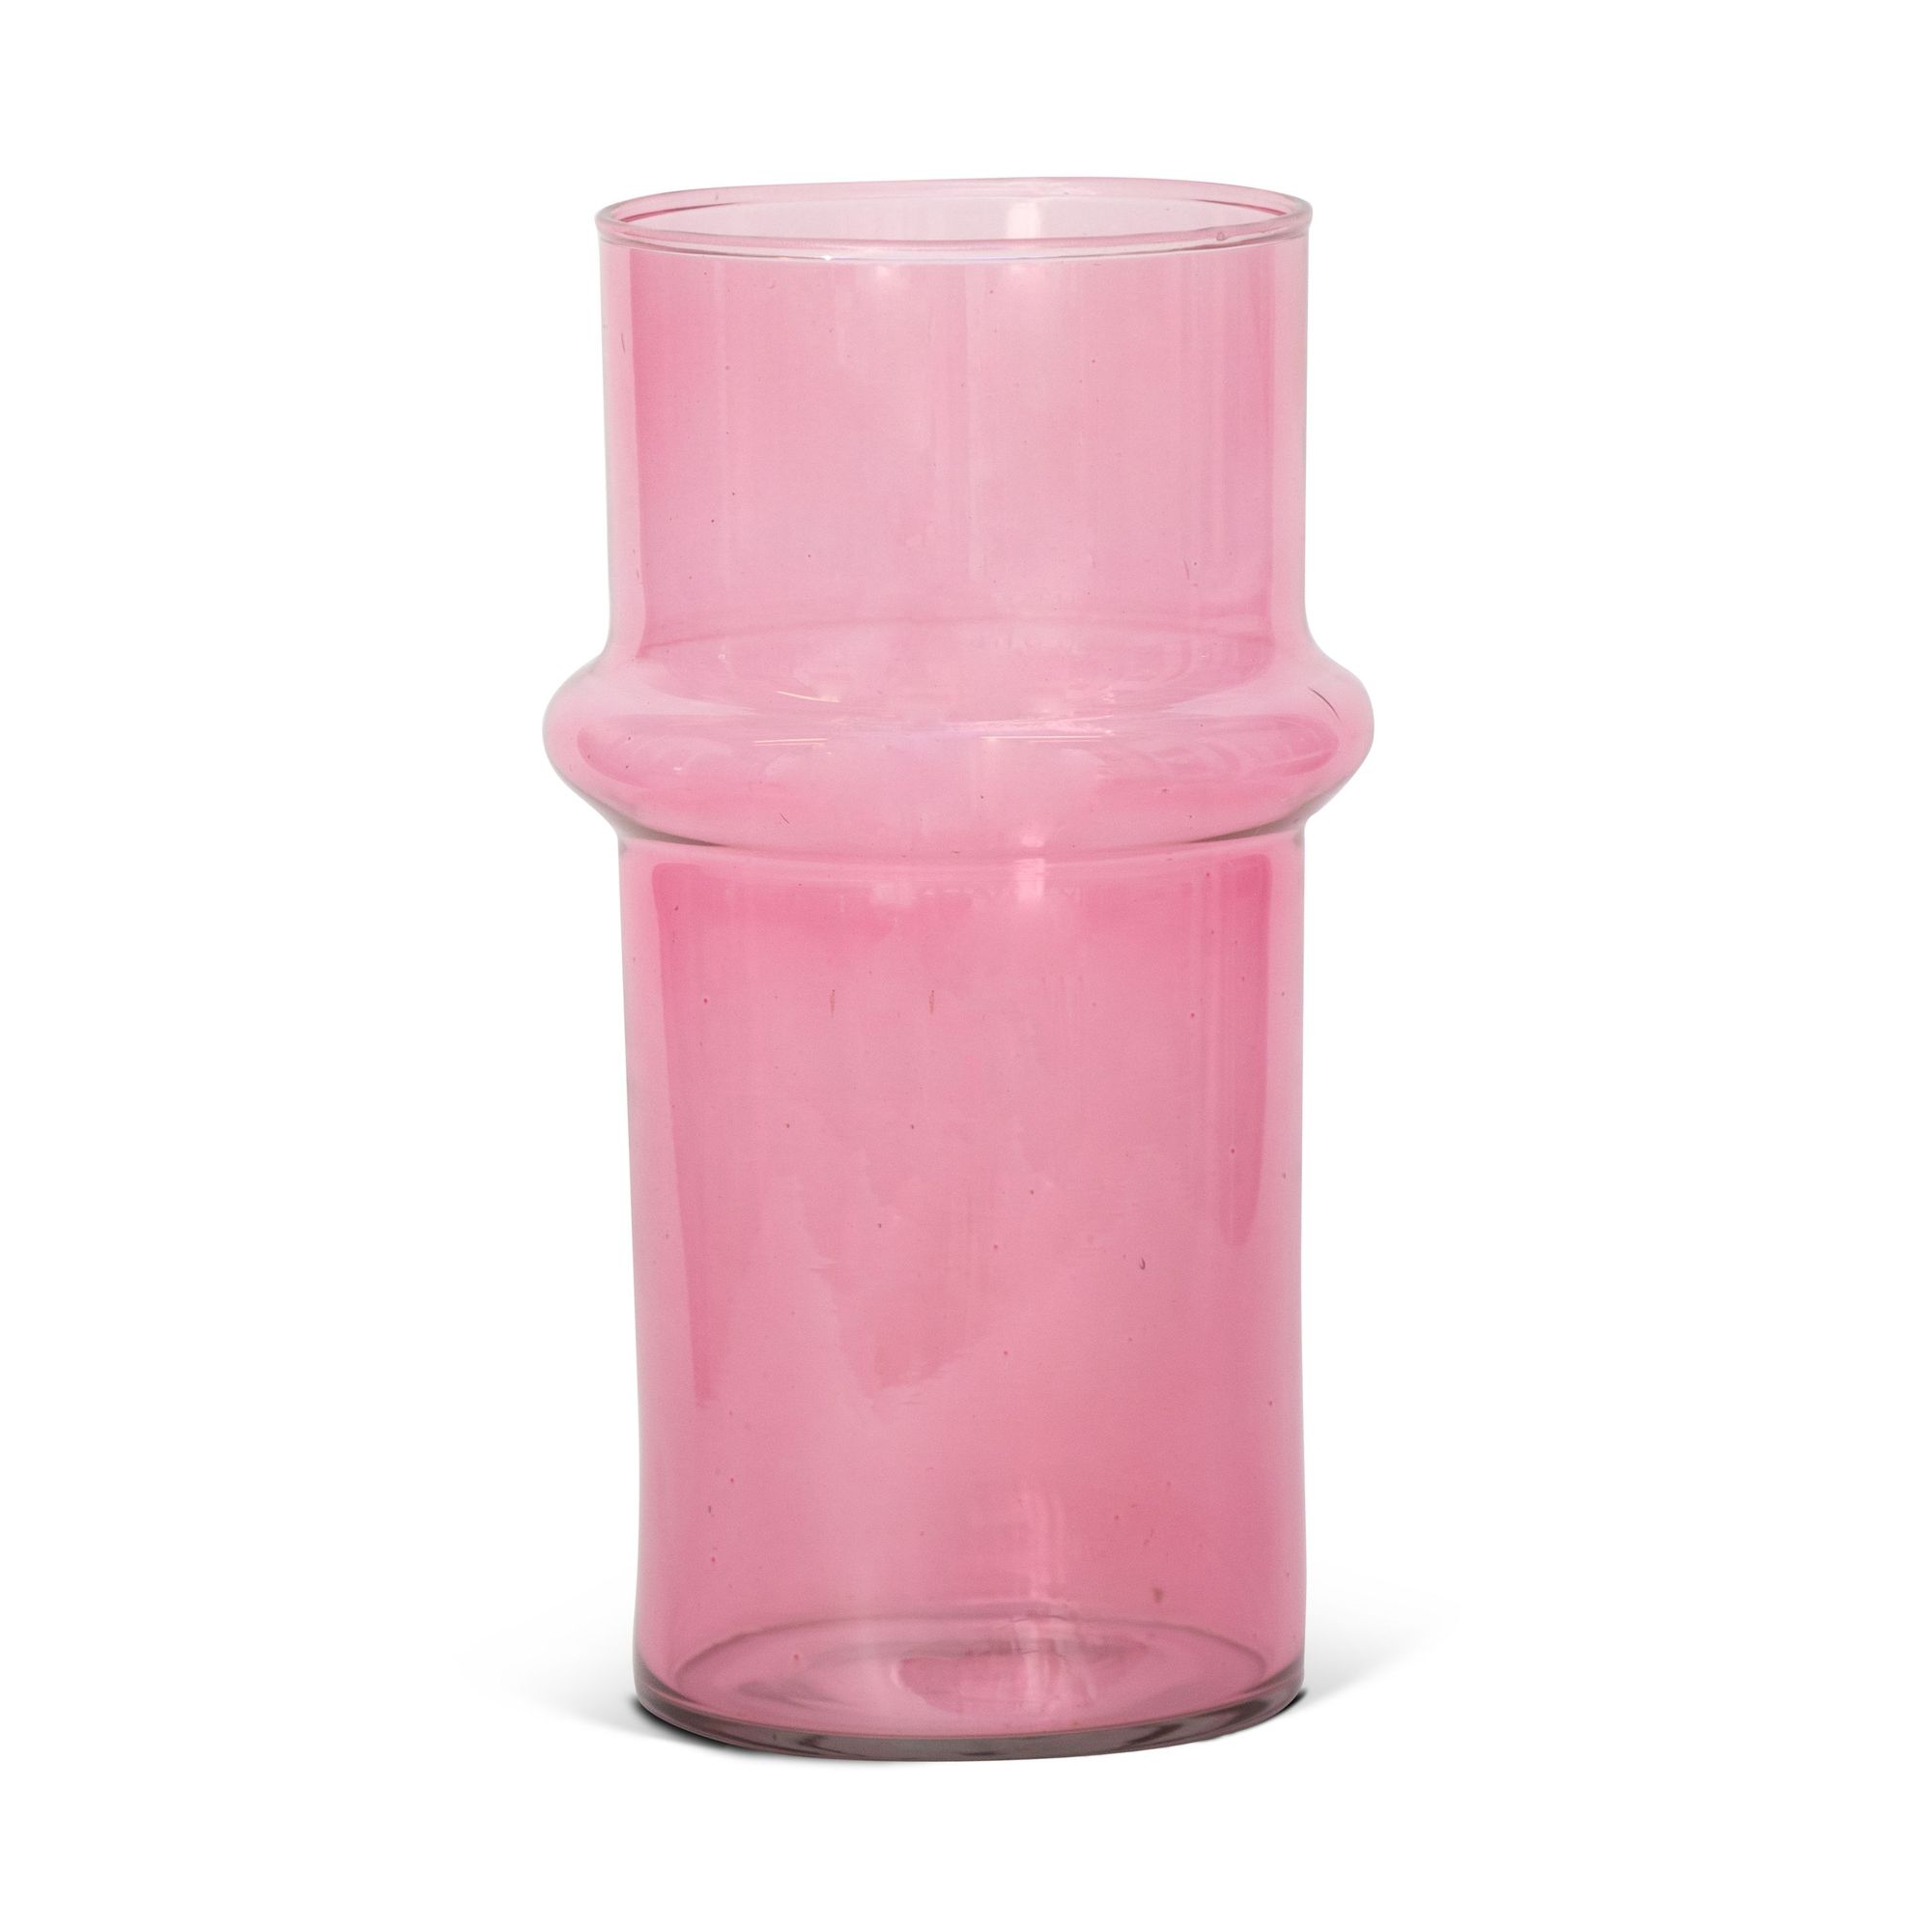 Unc Vase Recycled Glass Pink Gift